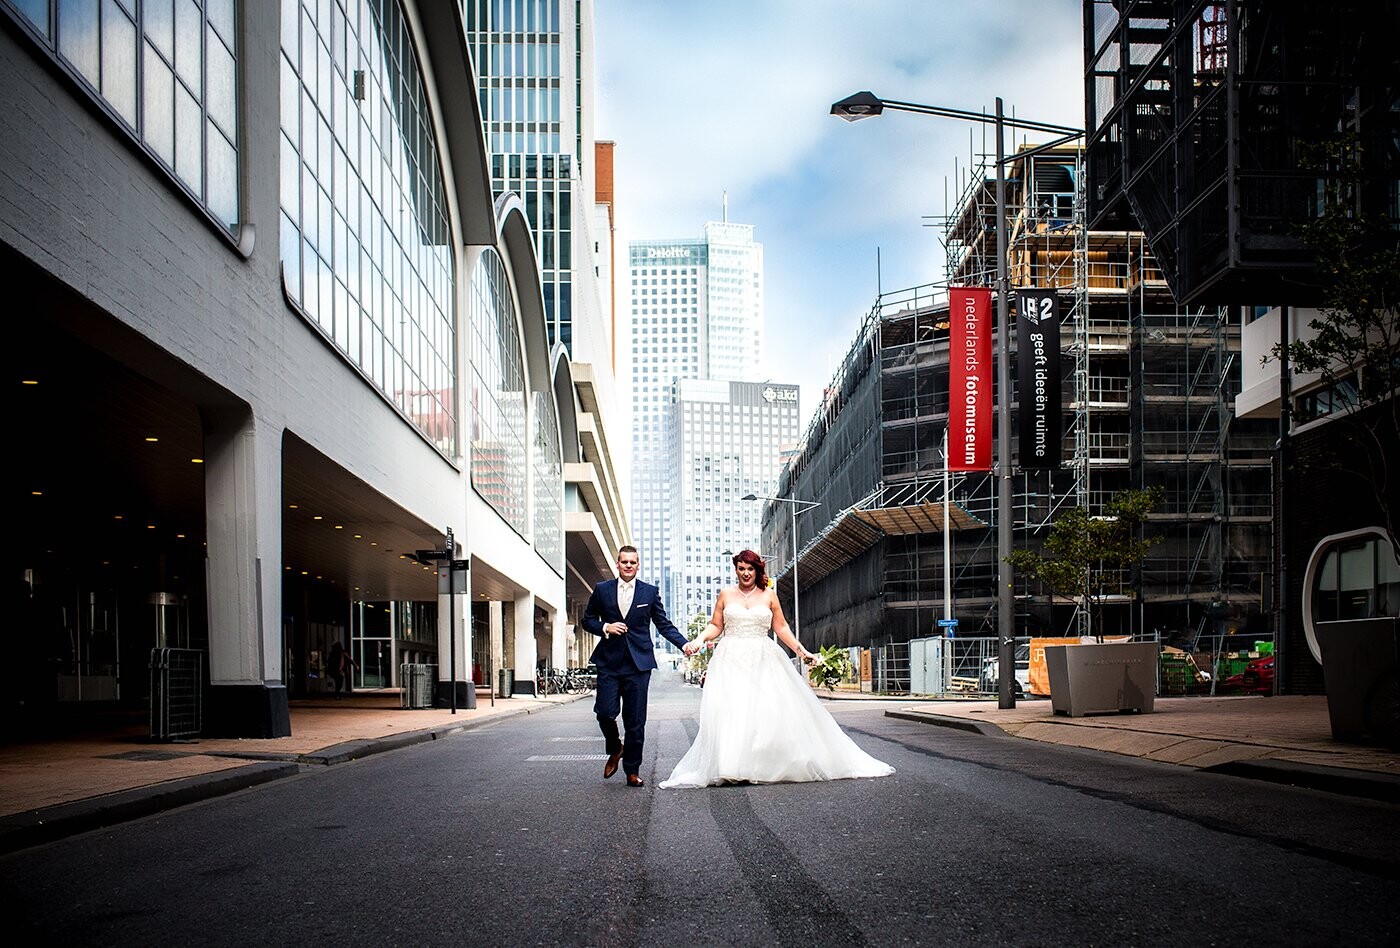 This couple are typical Rotterdam citizens and wanted their wedding pictures a little industrial and city like on their weddingday in October.<br />
<br />
We had to wait minutes and minutes untill the street was fully empty (it's a crowdy place in Rotterdam city with lots of traffic).<br />
<br />
The Dutch photomuseum is also situated in this street and the banner of the museum is visible in red on the picture which i thought was a funny accent as the theme of this couple was red for their special day. The black banner says (it's in Dutch)  "gives ideas some space"  which i thought was a nice combination mentioning this photo ;)<br />
<br />
